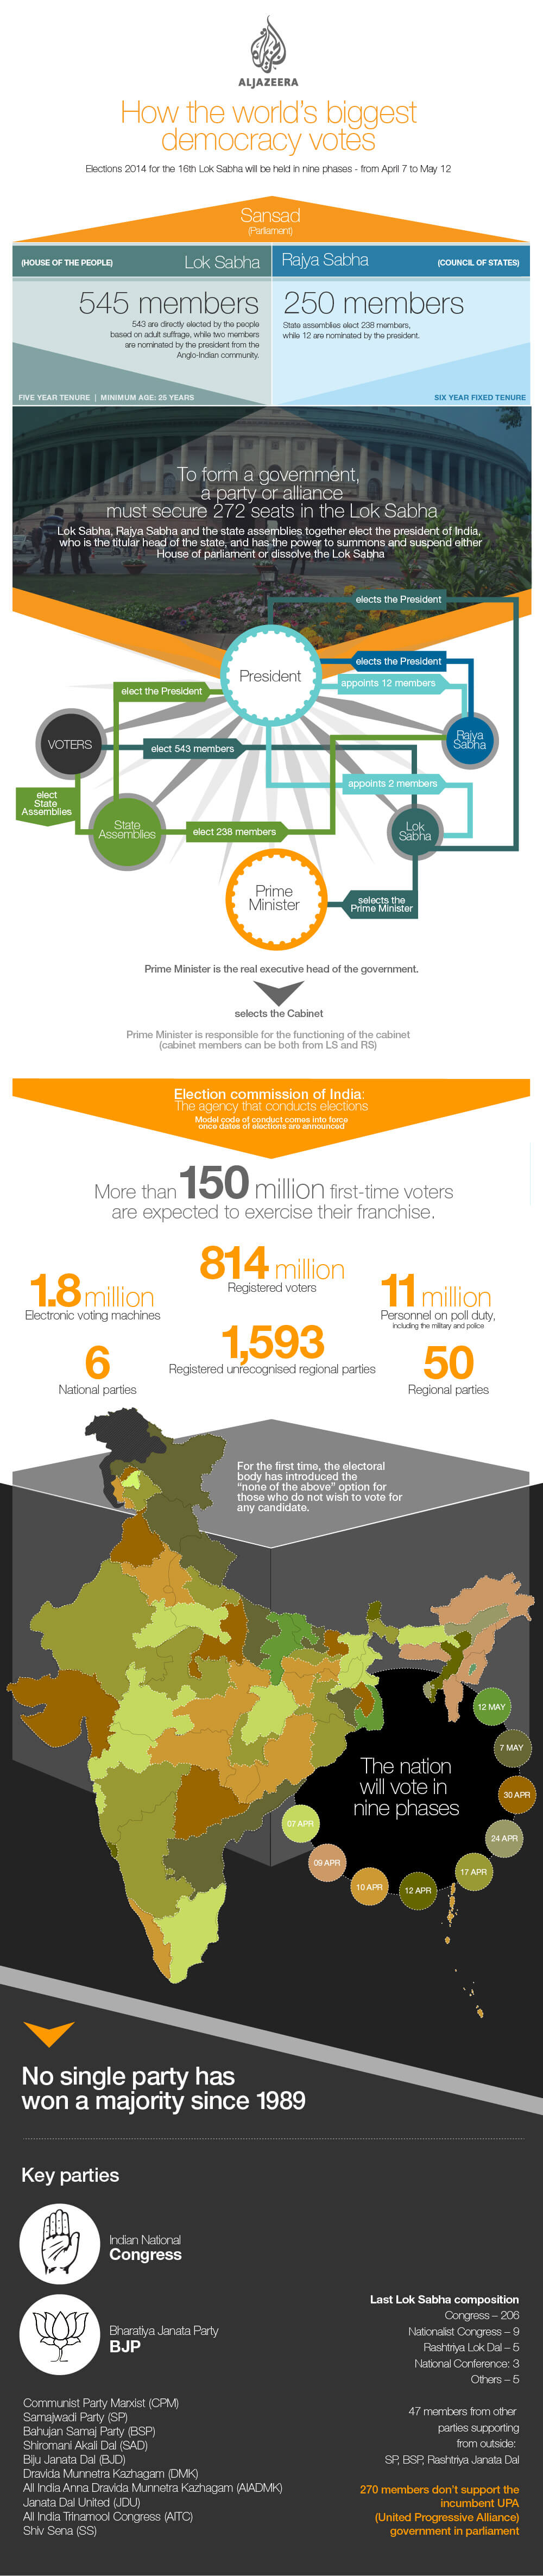 Election Infographic